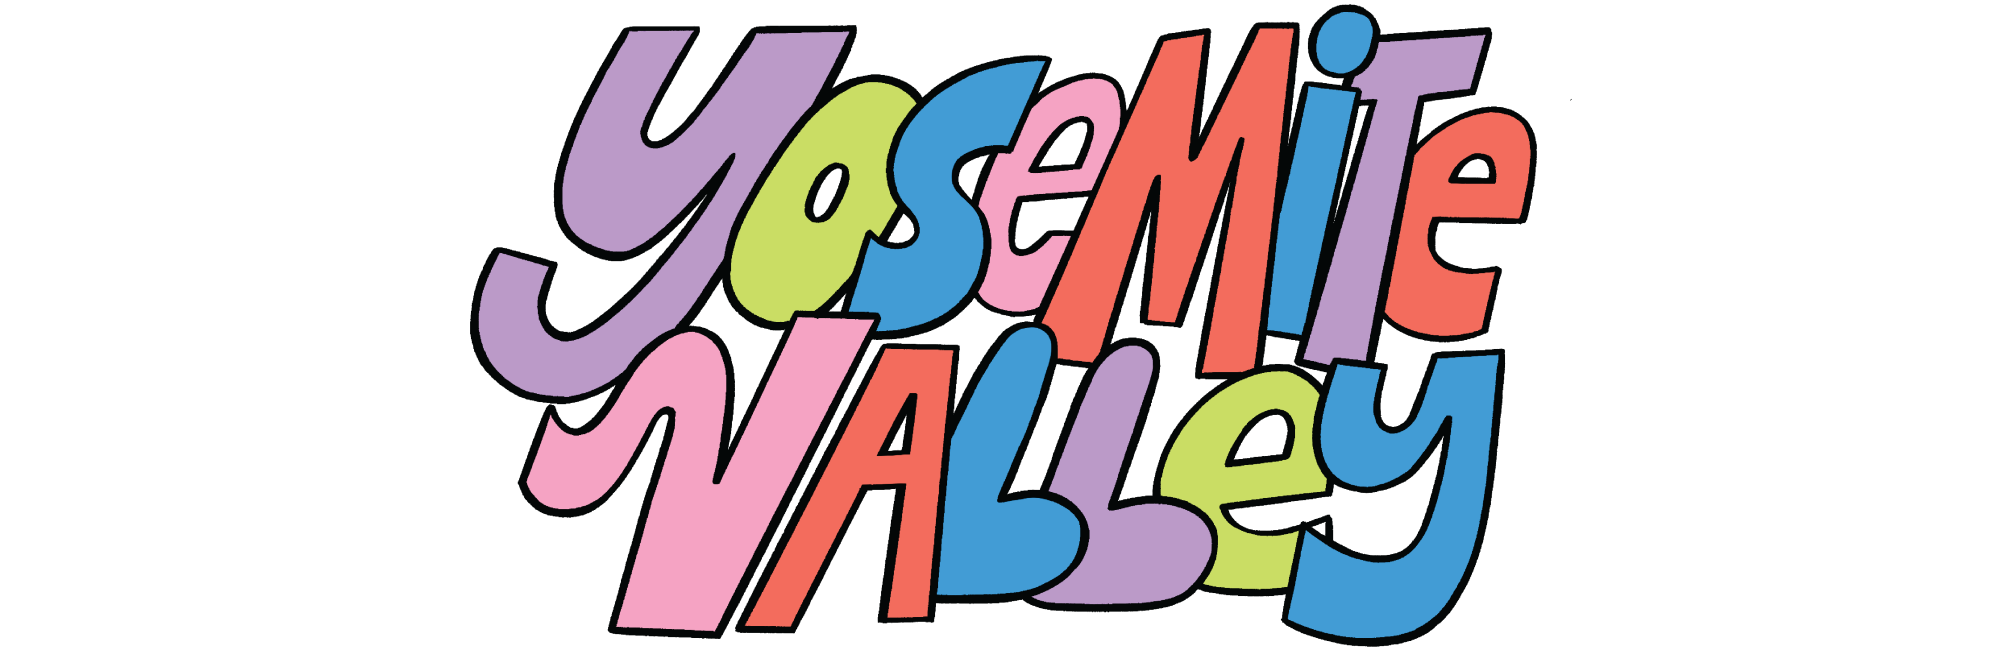 Colorful typography saying Yosemite Valley